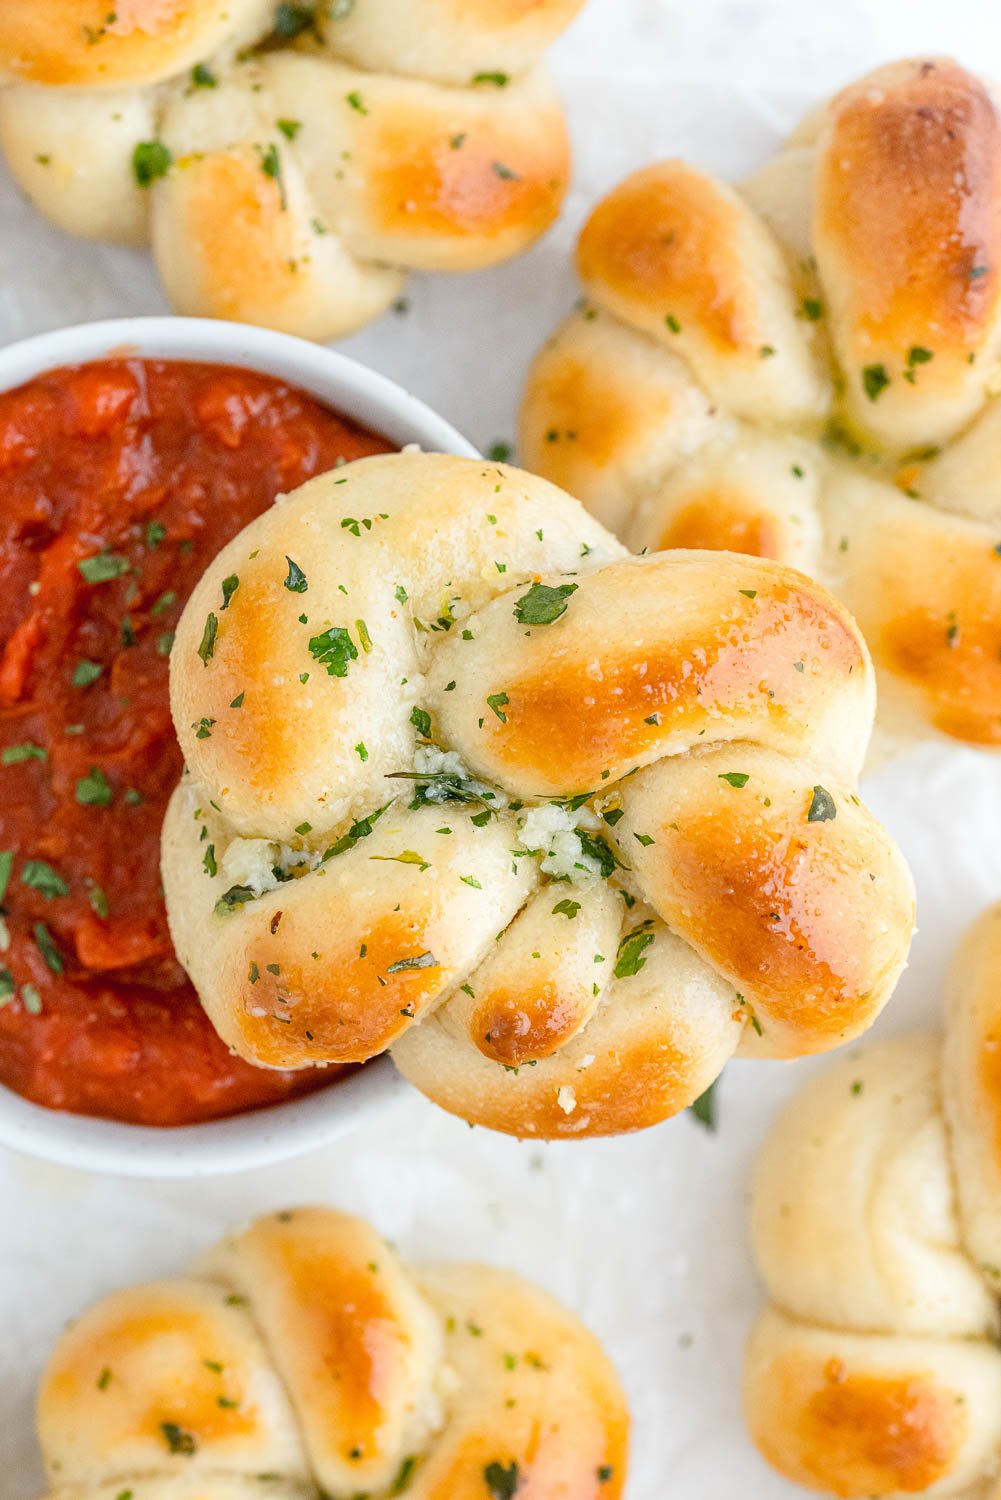 Garlic knots with pizza sauce for dipping.